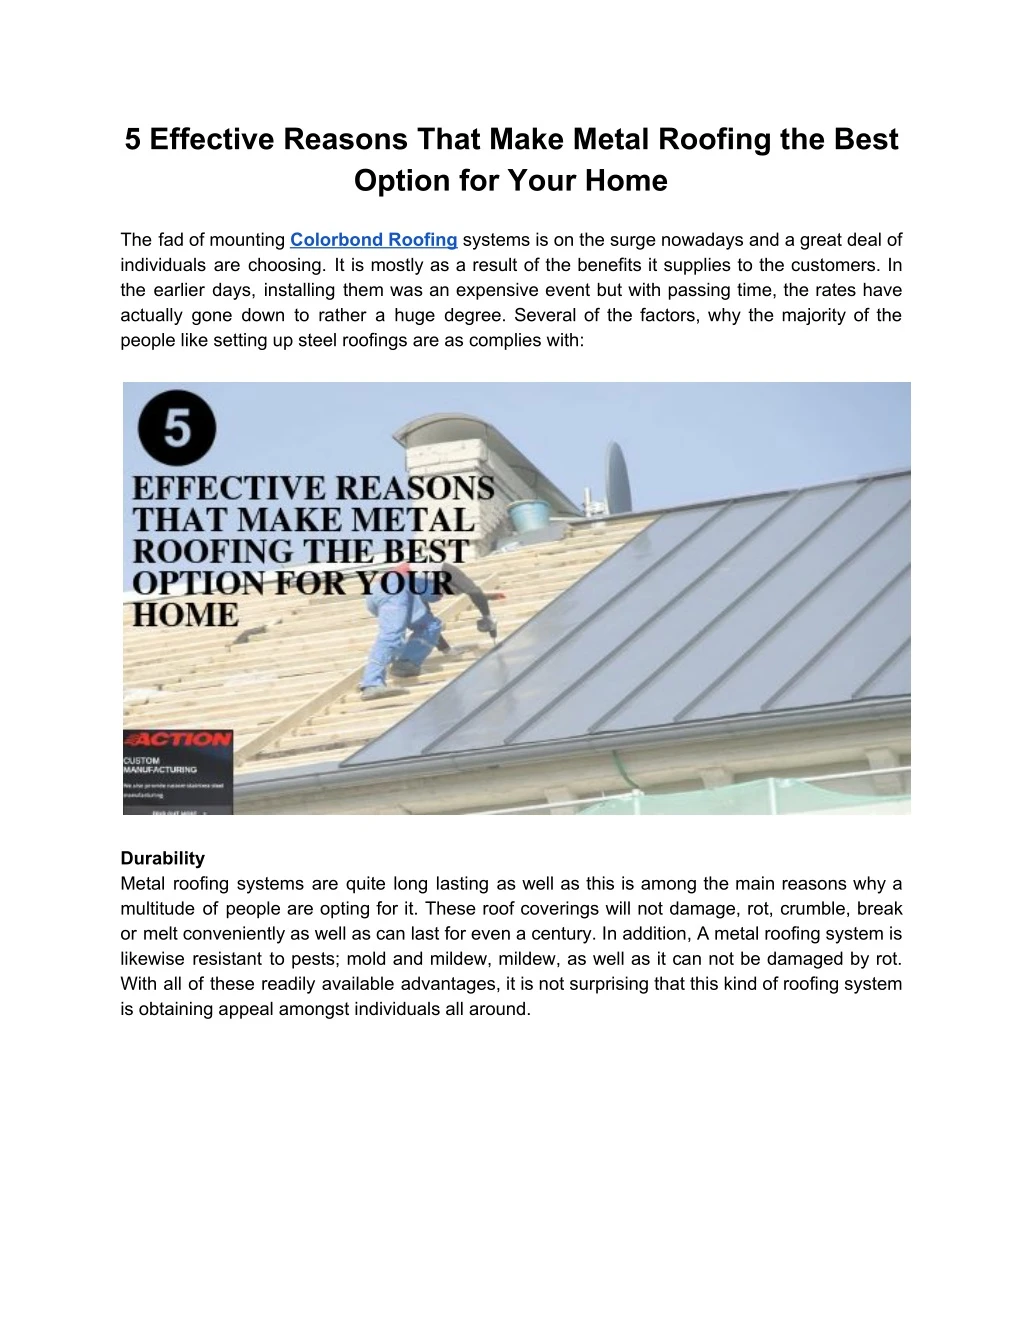 5 effective reasons that make metal roofing